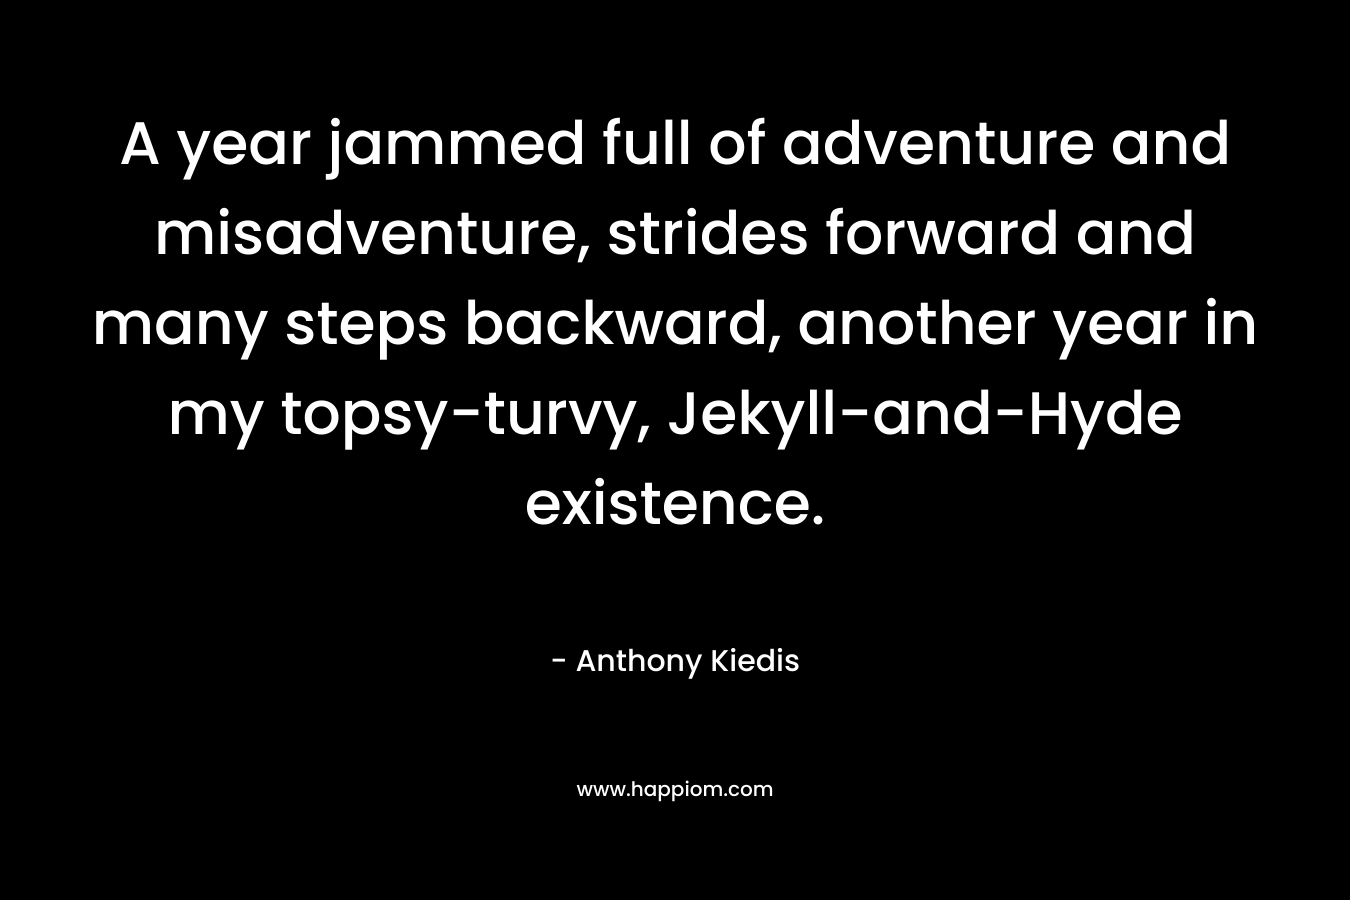 A year jammed full of adventure and misadventure, strides forward and many steps backward, another year in my topsy-turvy, Jekyll-and-Hyde existence. – Anthony Kiedis